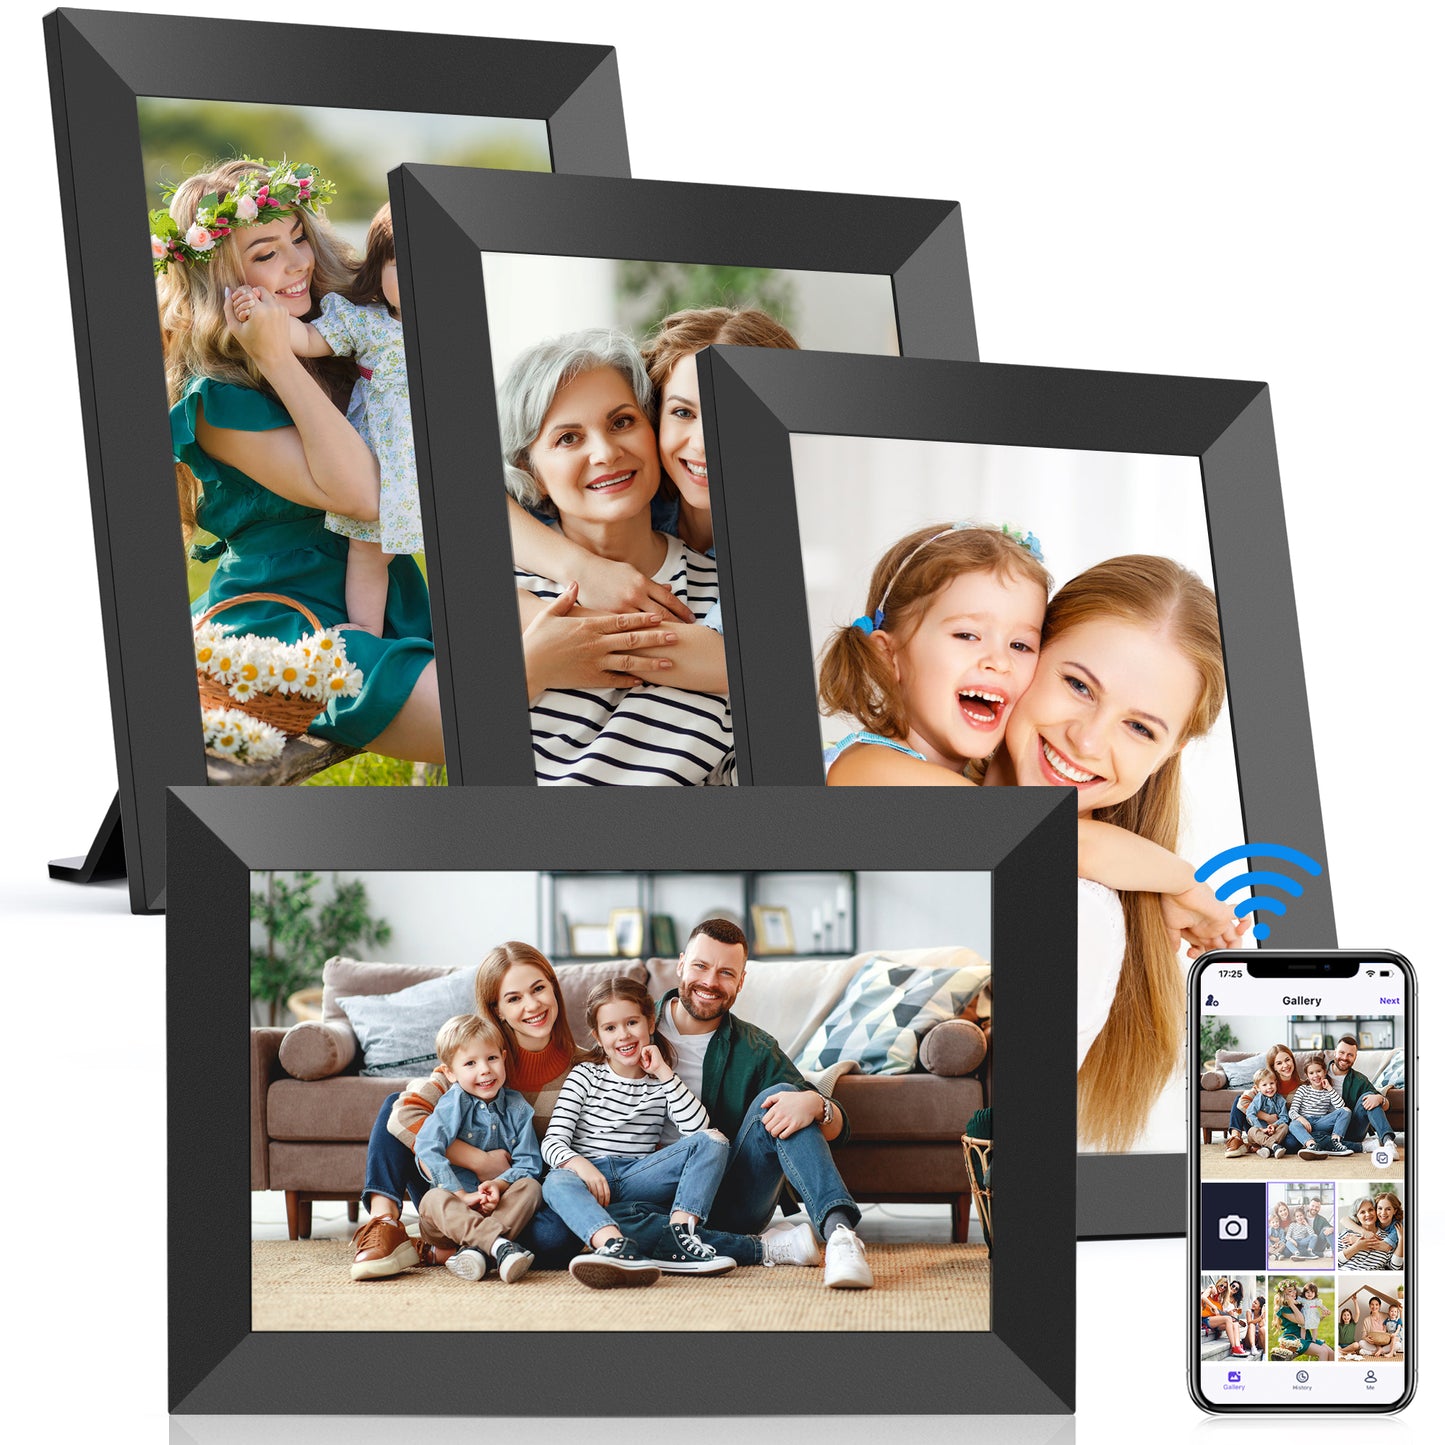 WiFi Digital Photo Frame, Nusican 10.1 Inch IPS Touch Screen Electric Smart Picture Frame 32G Storage, 4 Pack WiFi Photo Frame with Wifi Share Photo Video via Free App Anytime , Best Holiday Gifts !